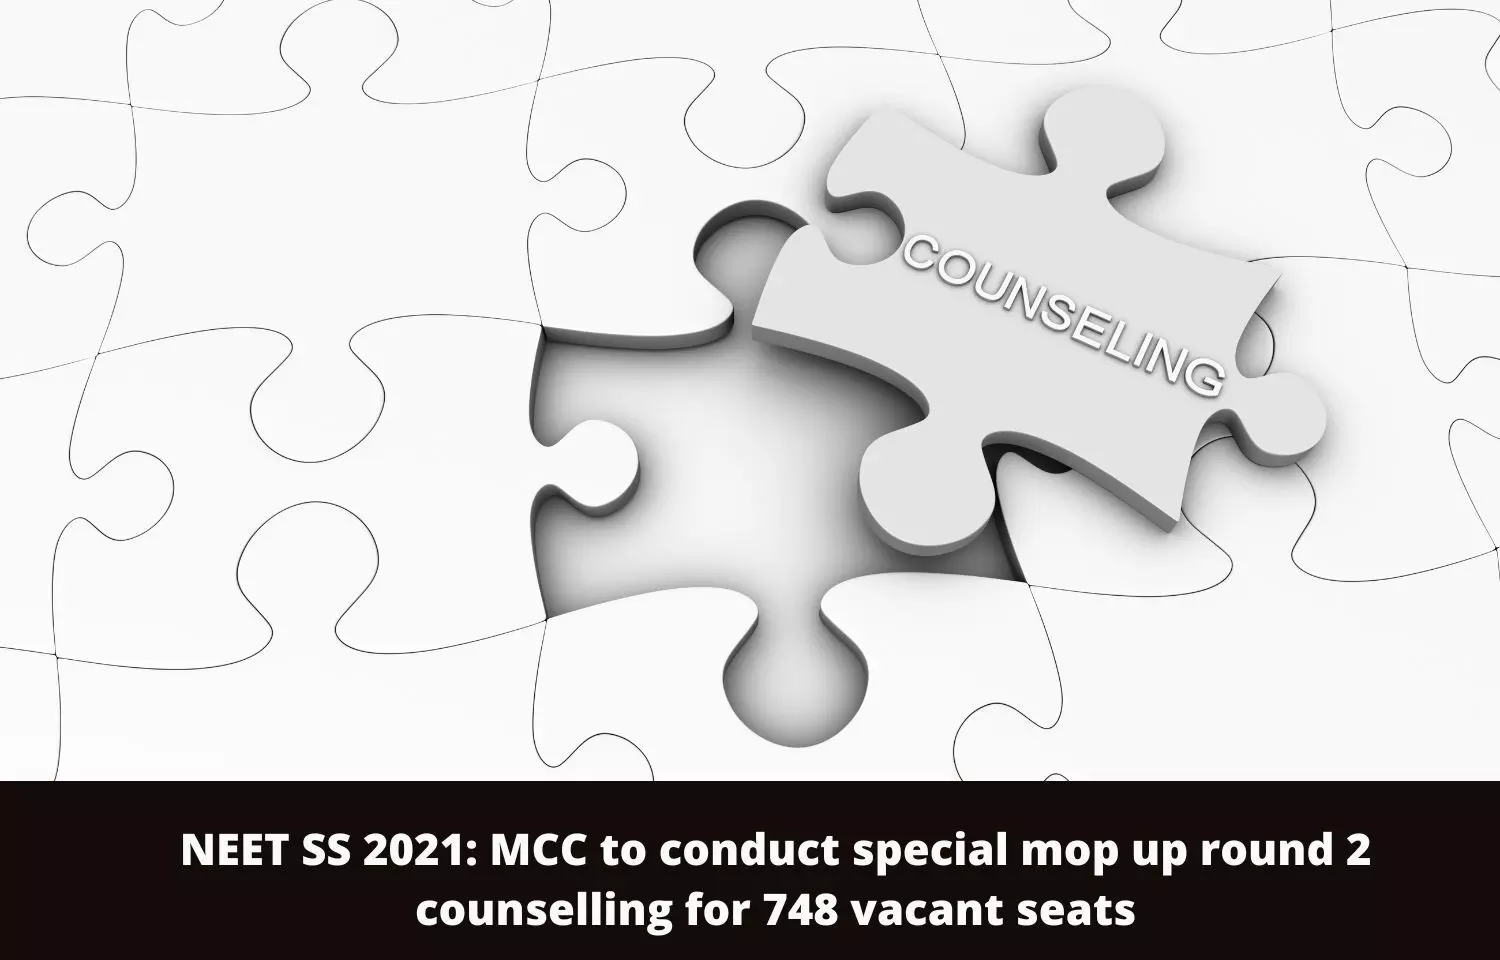 NEET SS 2021: MCC to conduct special mop up round 2 counselling for 748 vacant seats